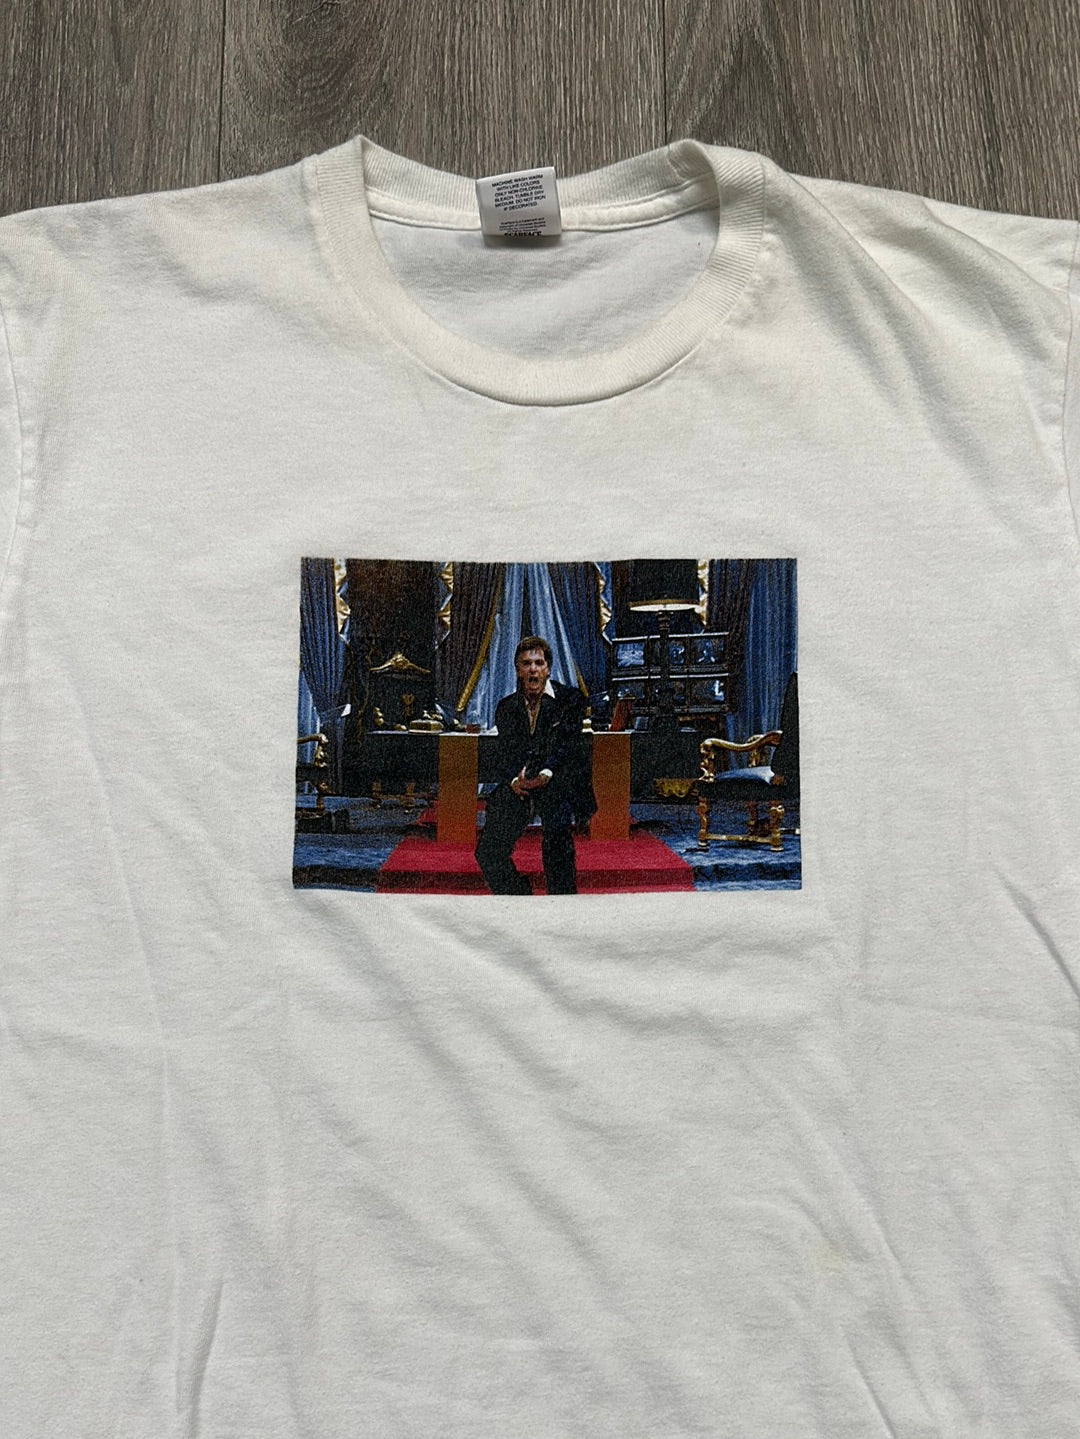 Supreme Scarface Friend Tee White (Used)